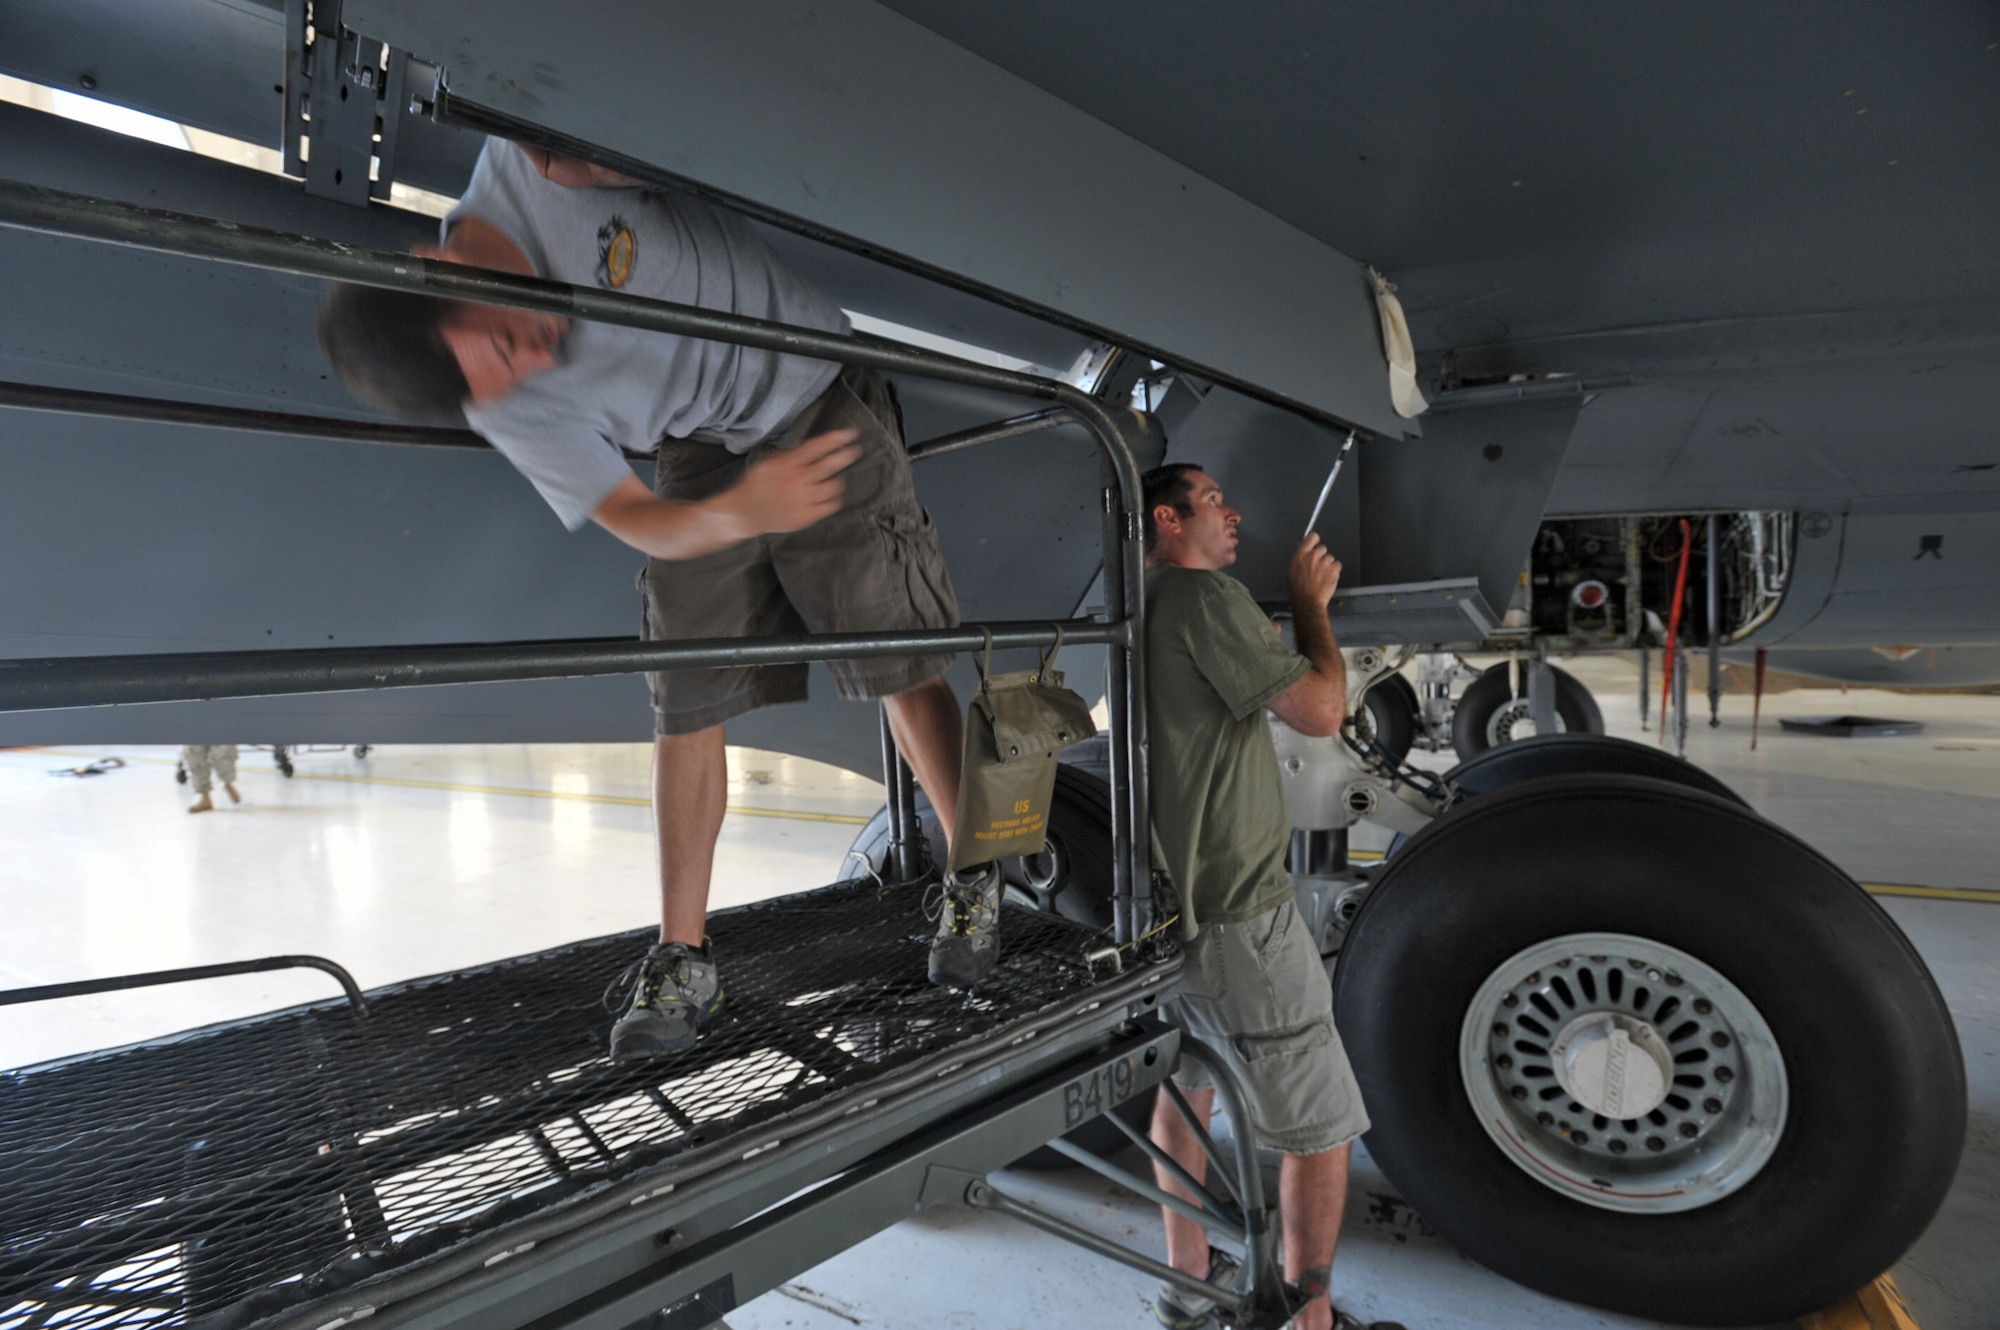 Tech. Sgt. Adam Keeter (on left) and Tech. Sgt. Seth Cullum work together to replace a seal at the bottom of a KC-135 Stratotanker in a hangar at McConnell Air Force Base, Kan. They are part of a "blended" Reserve and active-duty team preparing for Air Mobility Rodeo 2009. Sergeant's Keeter and Cullum work for the 931st Aircraft Maintenance Squadron at McConnell as air reserve technicians, full-time civilian employees who work in the same position they occupy as Reservists. (U.S. Air Force photo/Tech. Sgt. Jason Schaap)